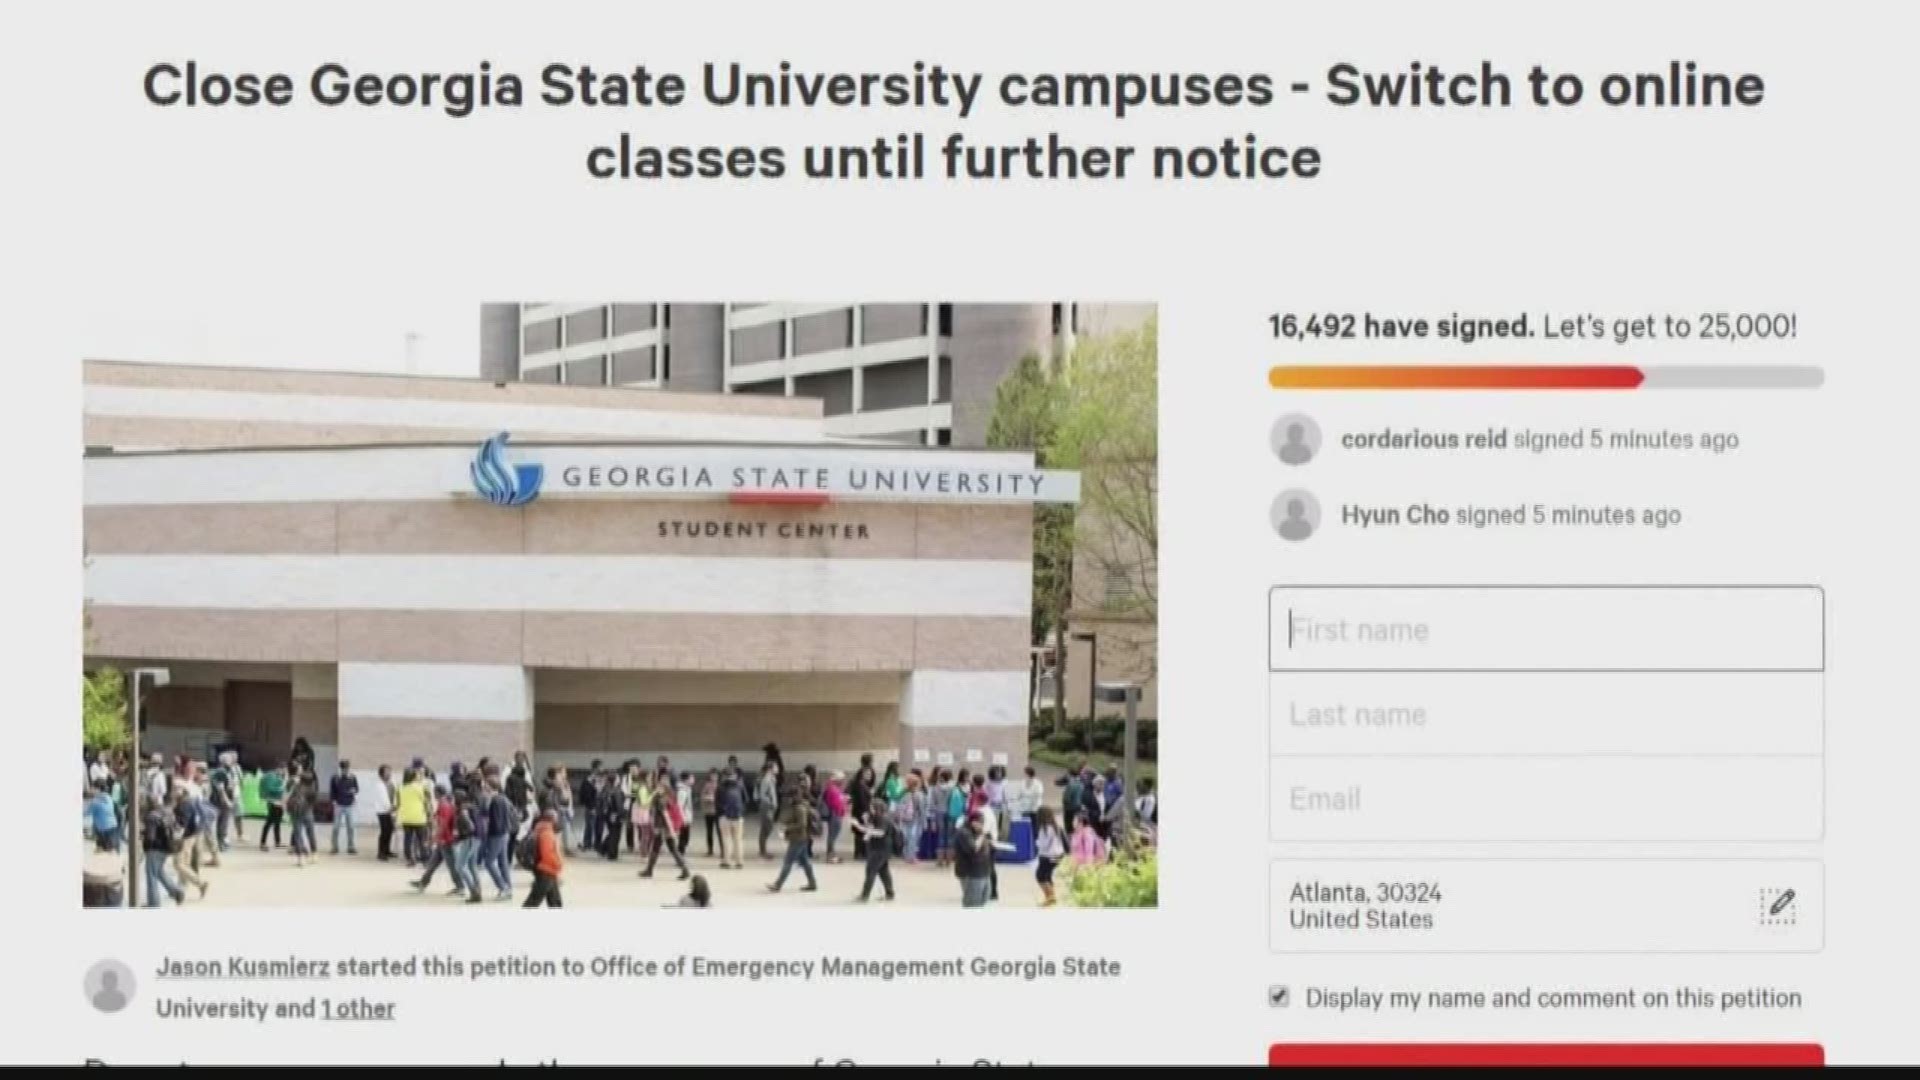 The petition, started Monday, seeks to shift classes to an online-only format, following the lead of other major universities around the nation.